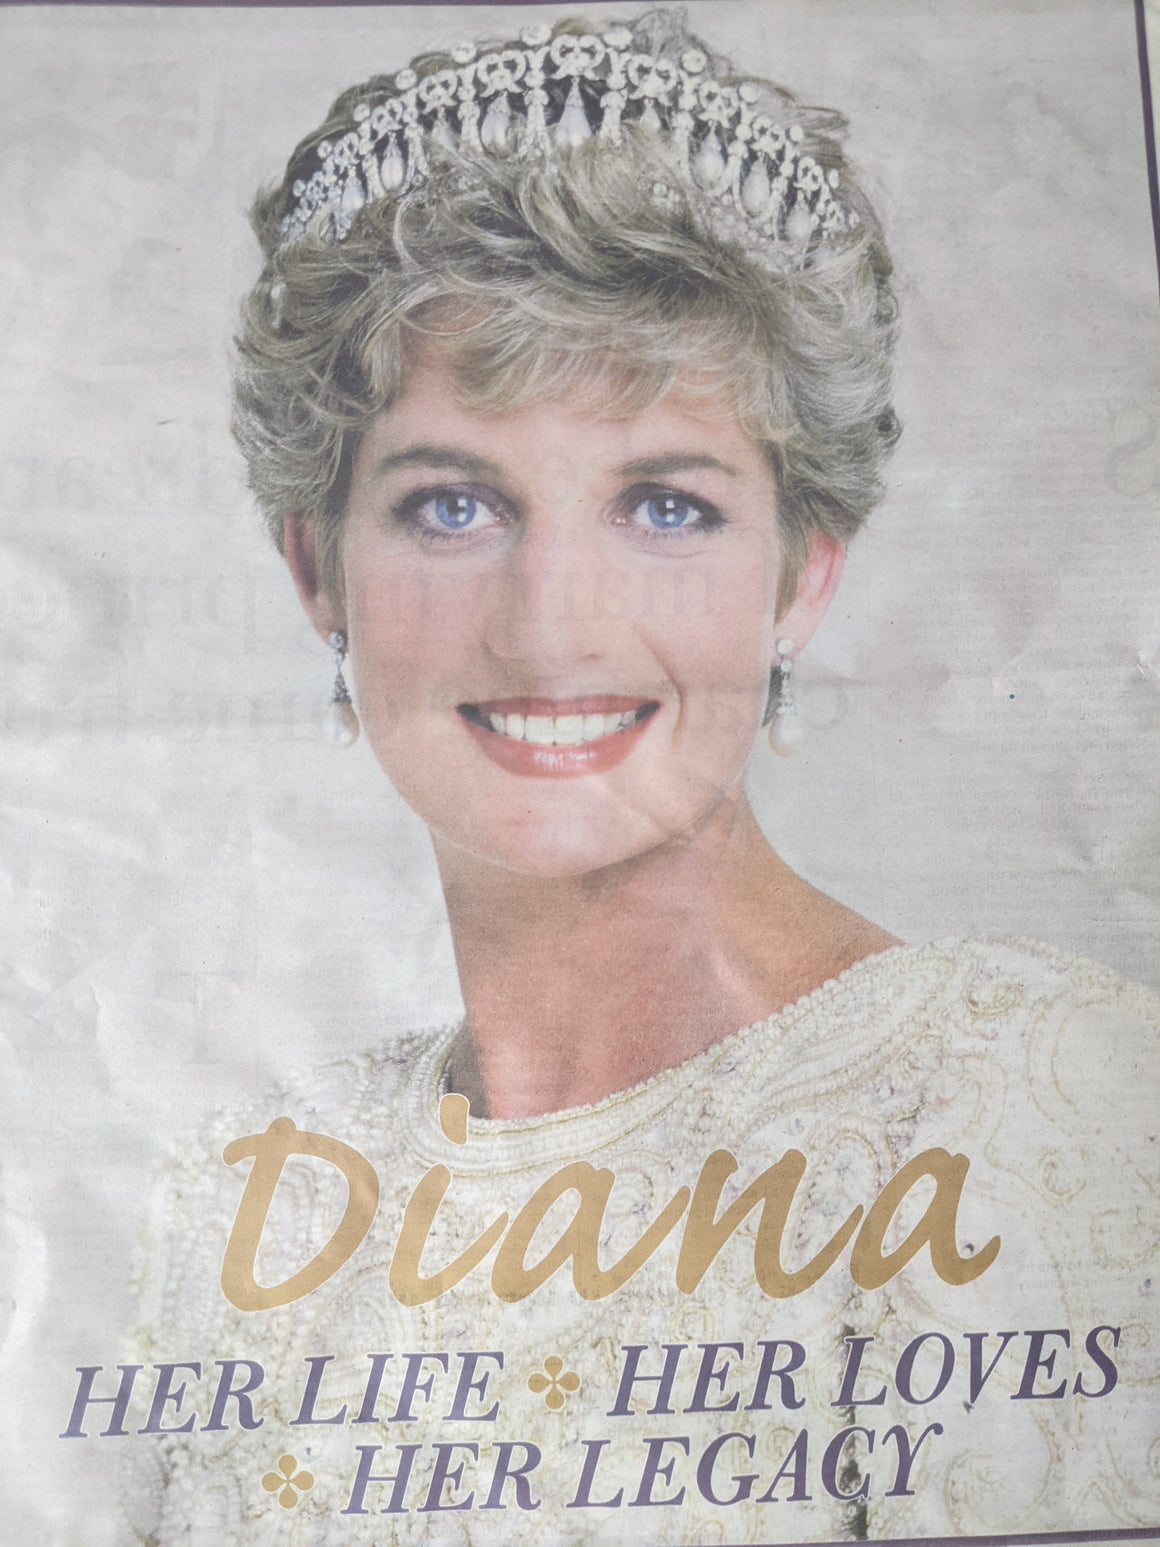 UK SUNDAY EXPRESS June 2021: PRINCESS DIANA AT 60 COVER FEATURE Her Legacy